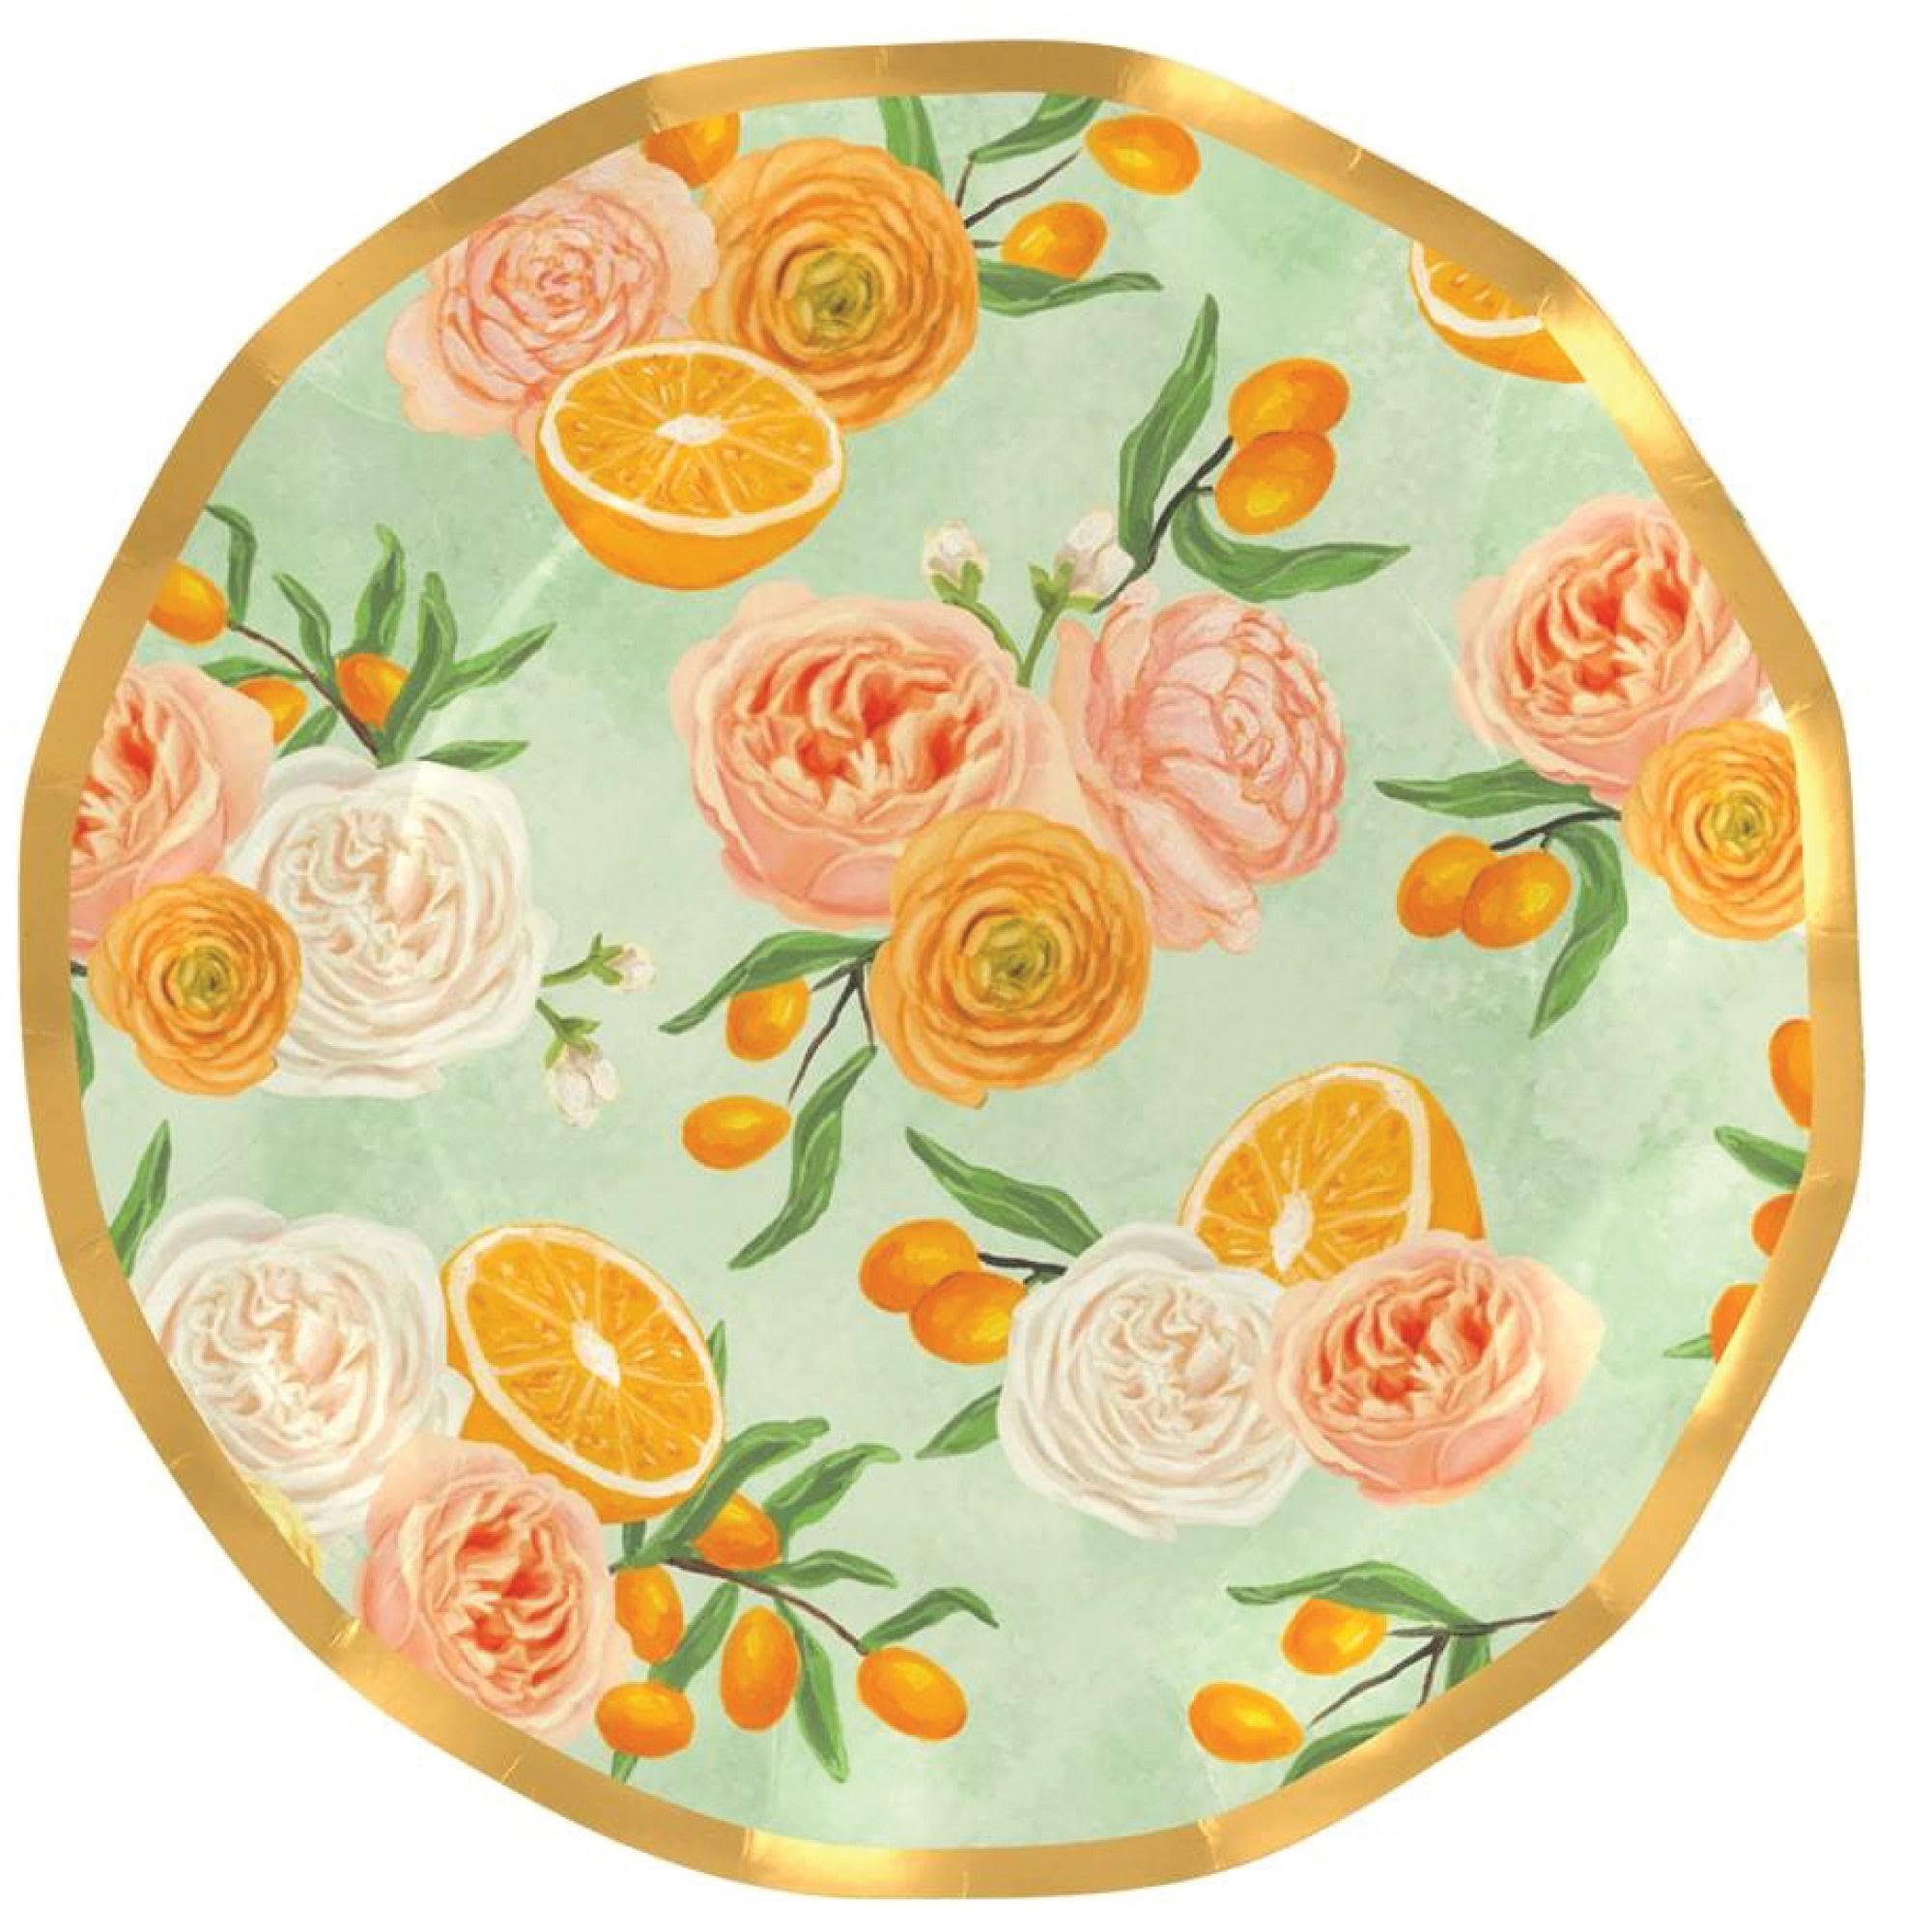 Sophistiplate Dinner Plates, Mimosa, 10 Inch - 8 plates